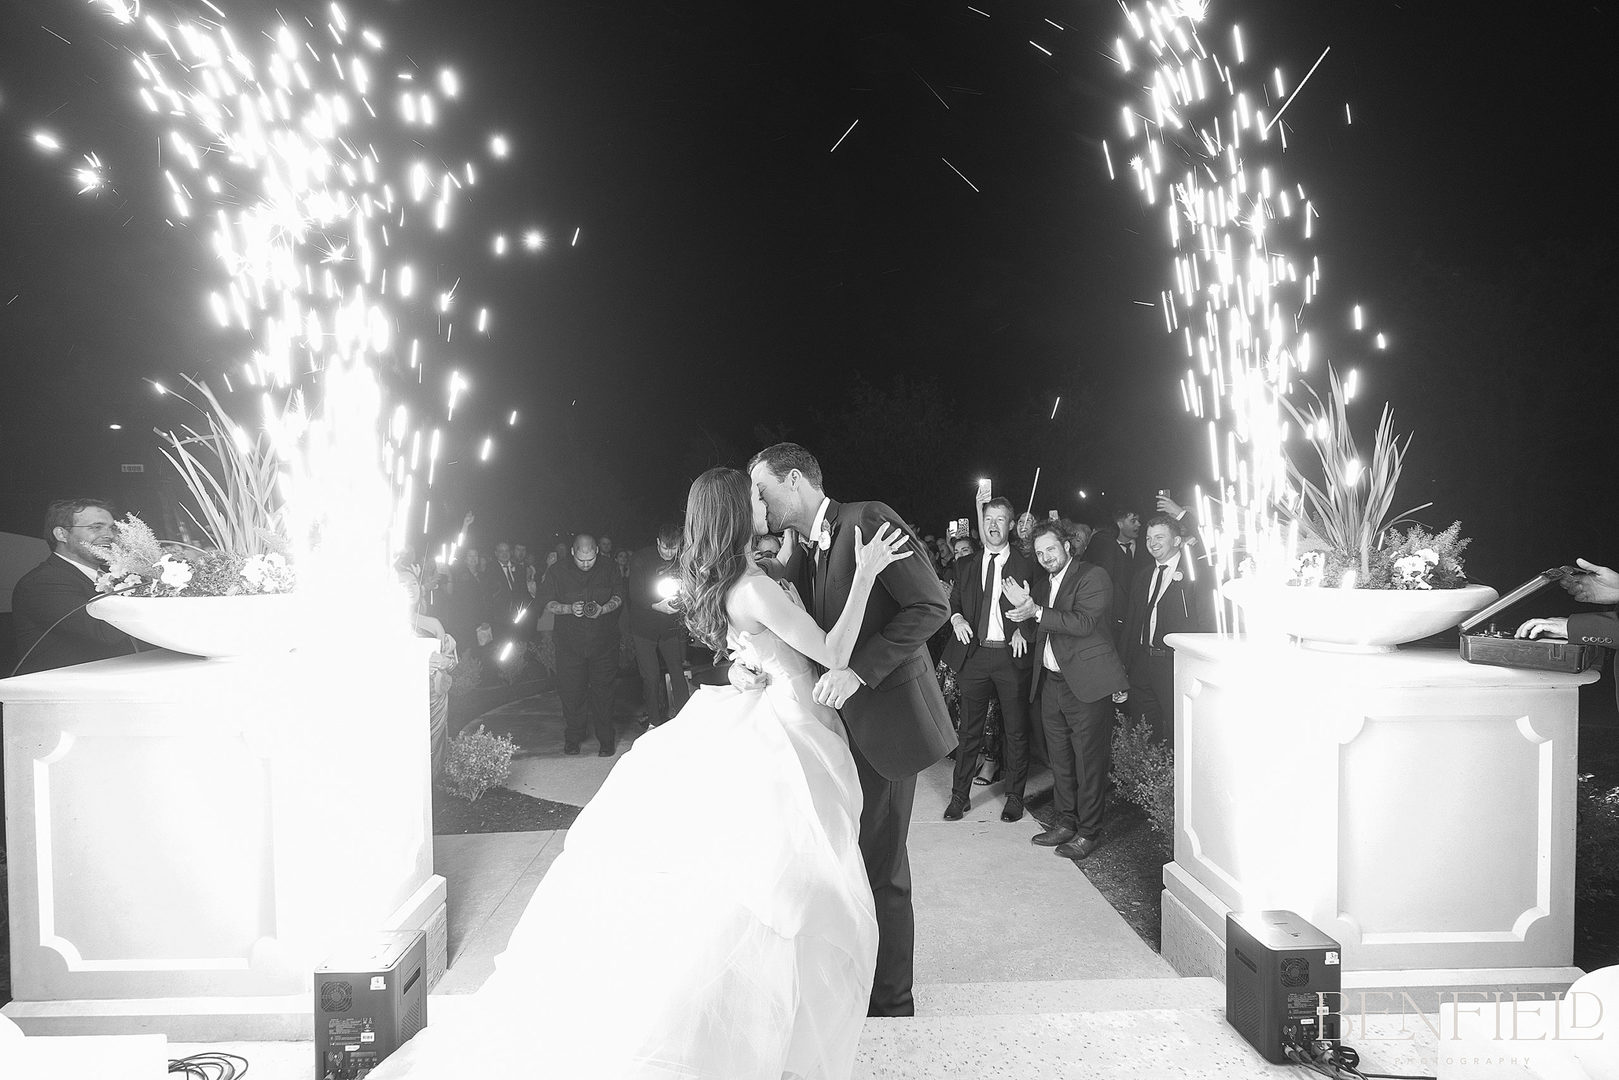 Bride and groom do a shower of cold sparkler exit getaway from their wedding reception.